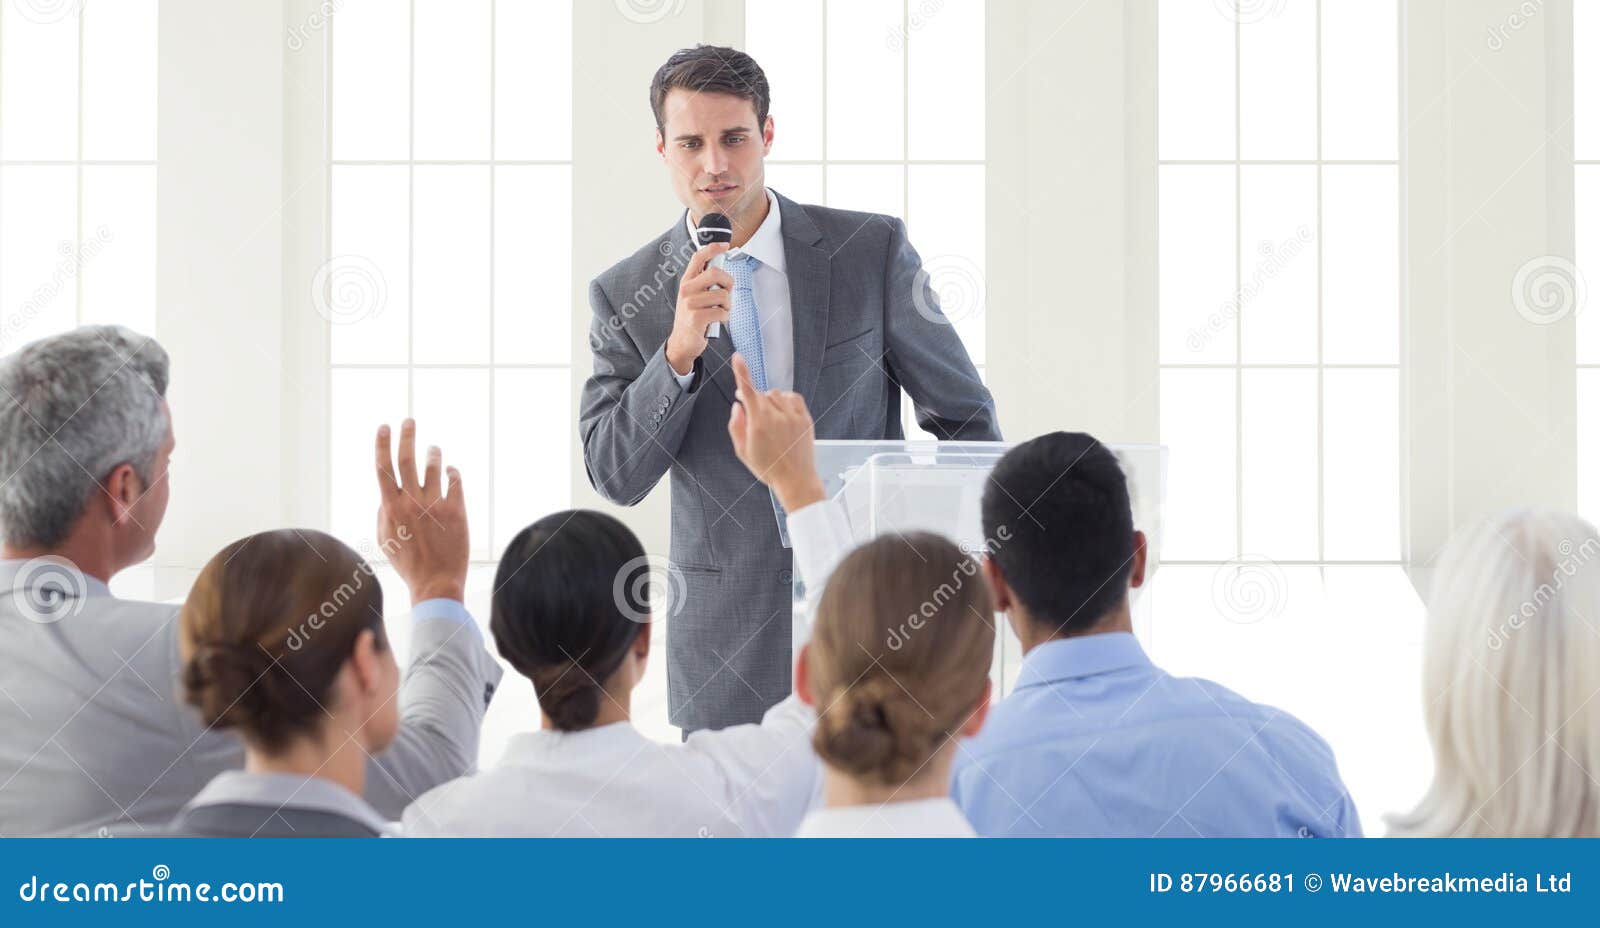 Businessman Giving a Speech in Conference Hall Stock Image  Image of